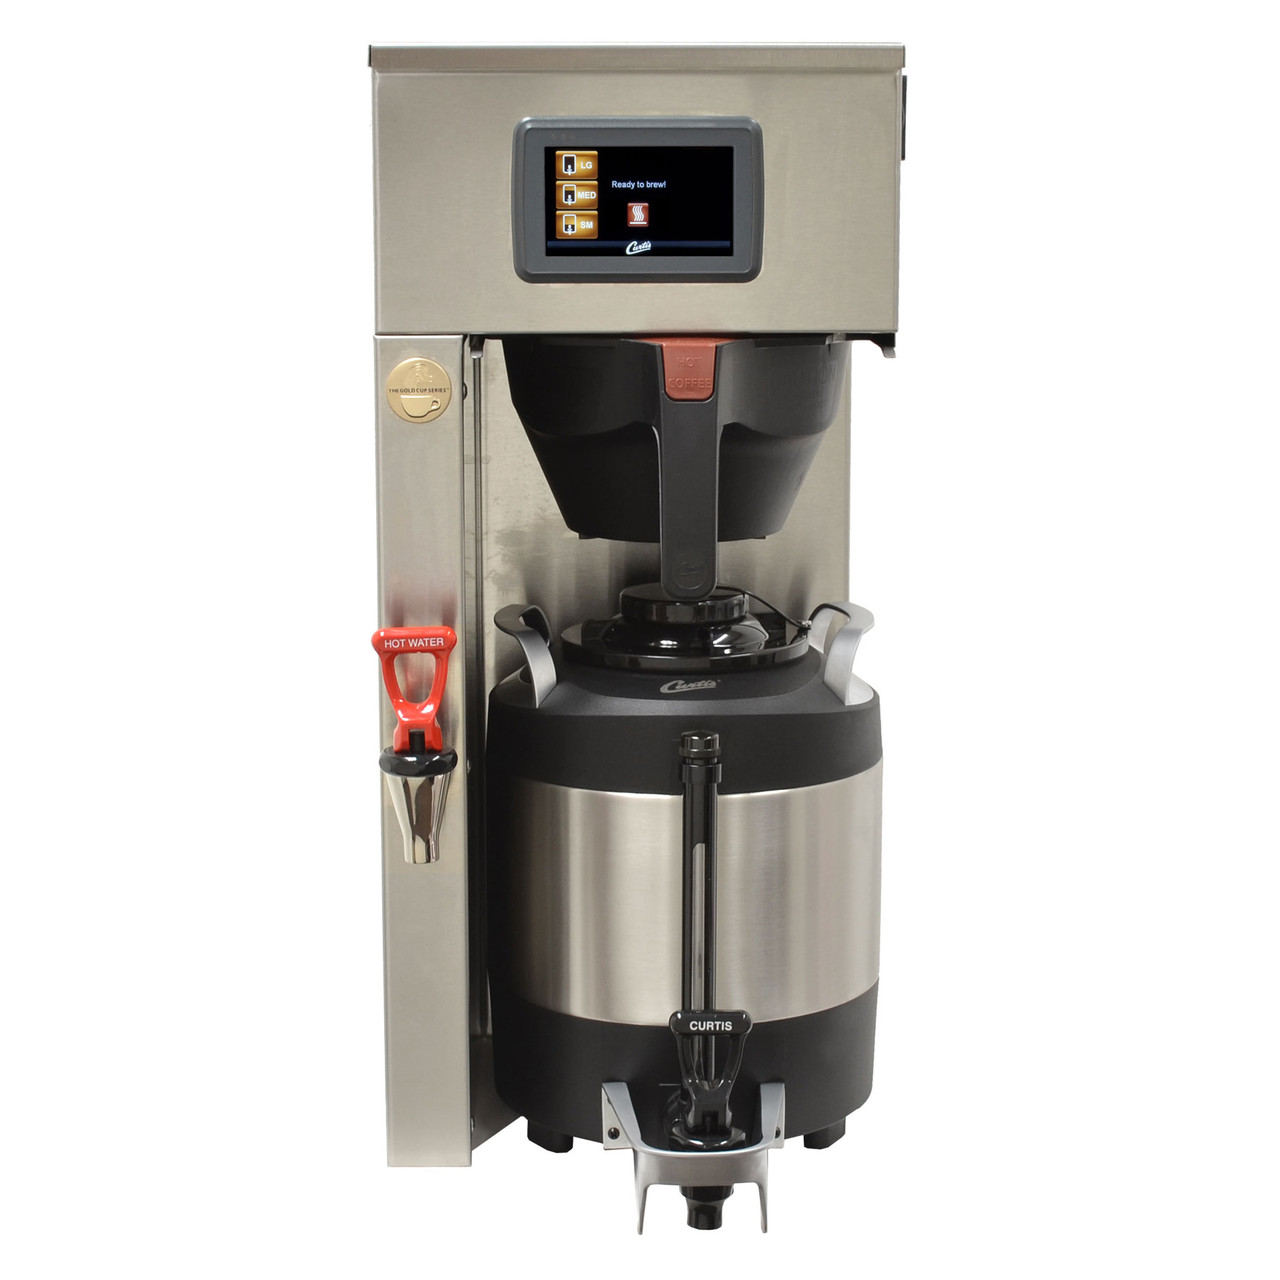 https://cdn11.bigcommerce.com/s-6h7ychjk4/products/8114/images/89004/curtis-g4-one-gallon-brewer-single__30421.1597181046.1280.1280.jpg?c=1